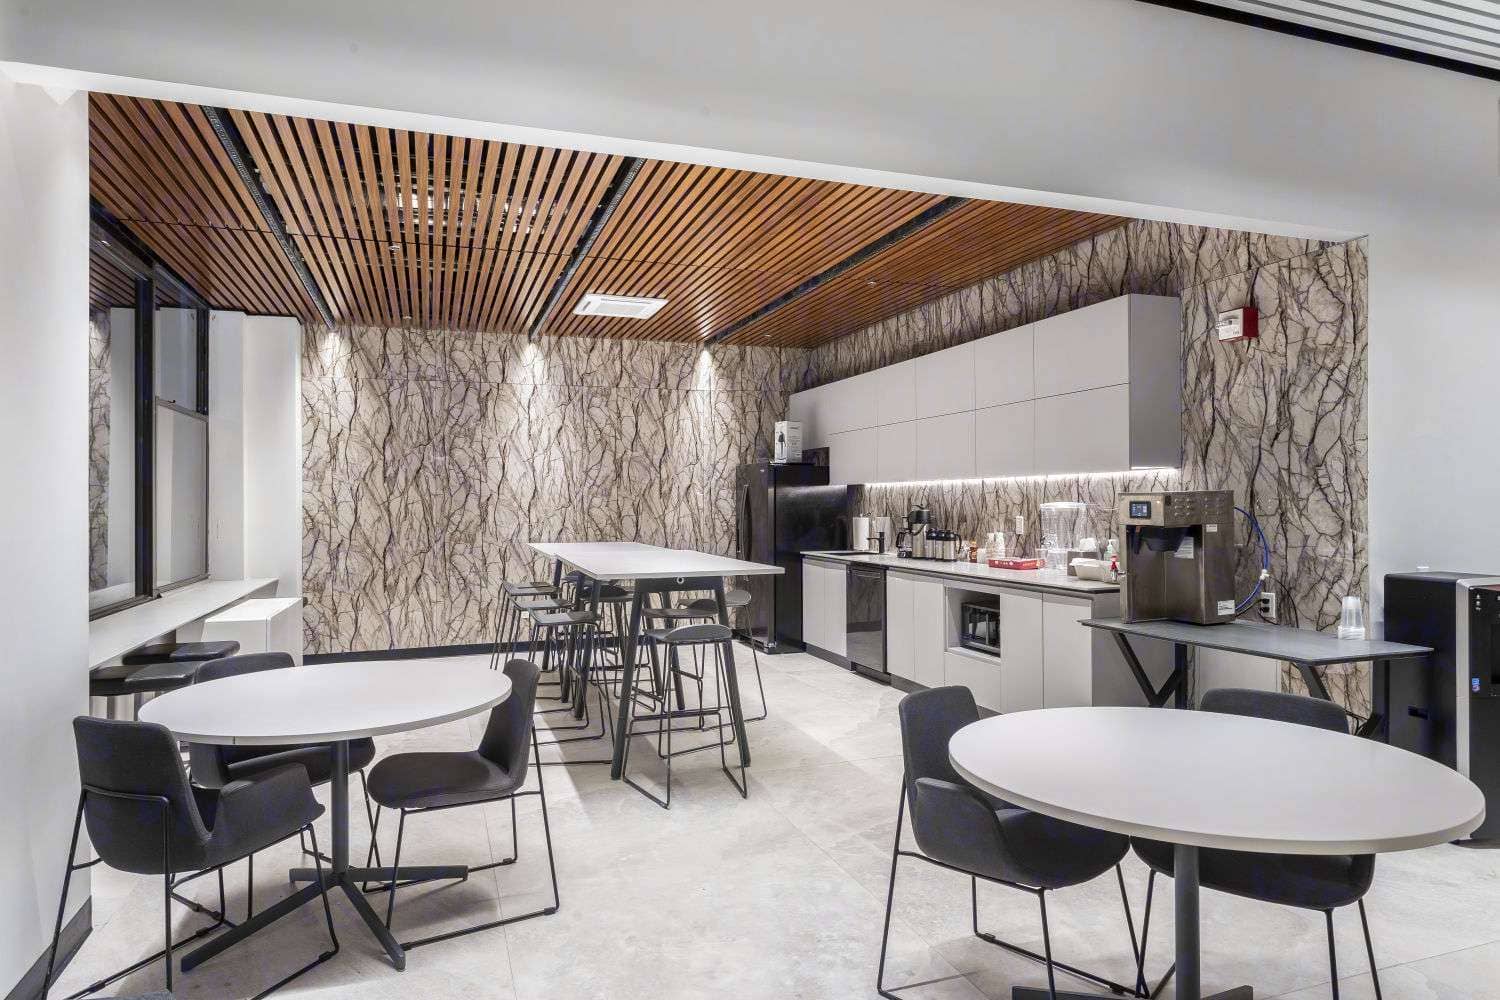 Contemporary coworking kitchen area, promoting networking and creativity.